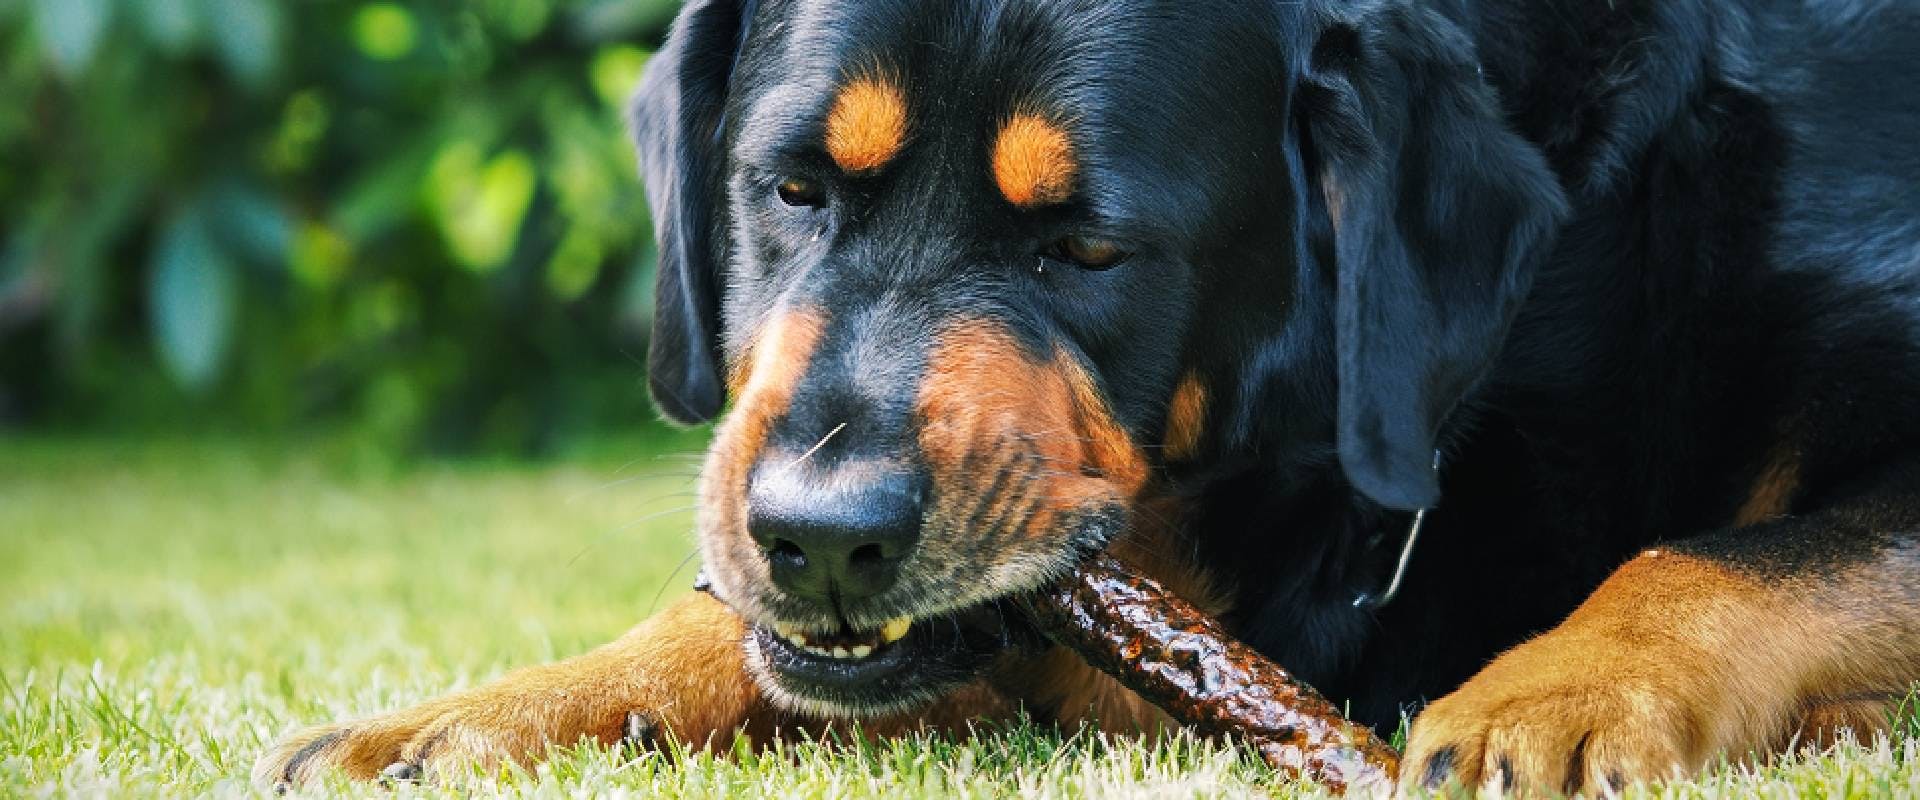 Rottweiler chewing on a stick